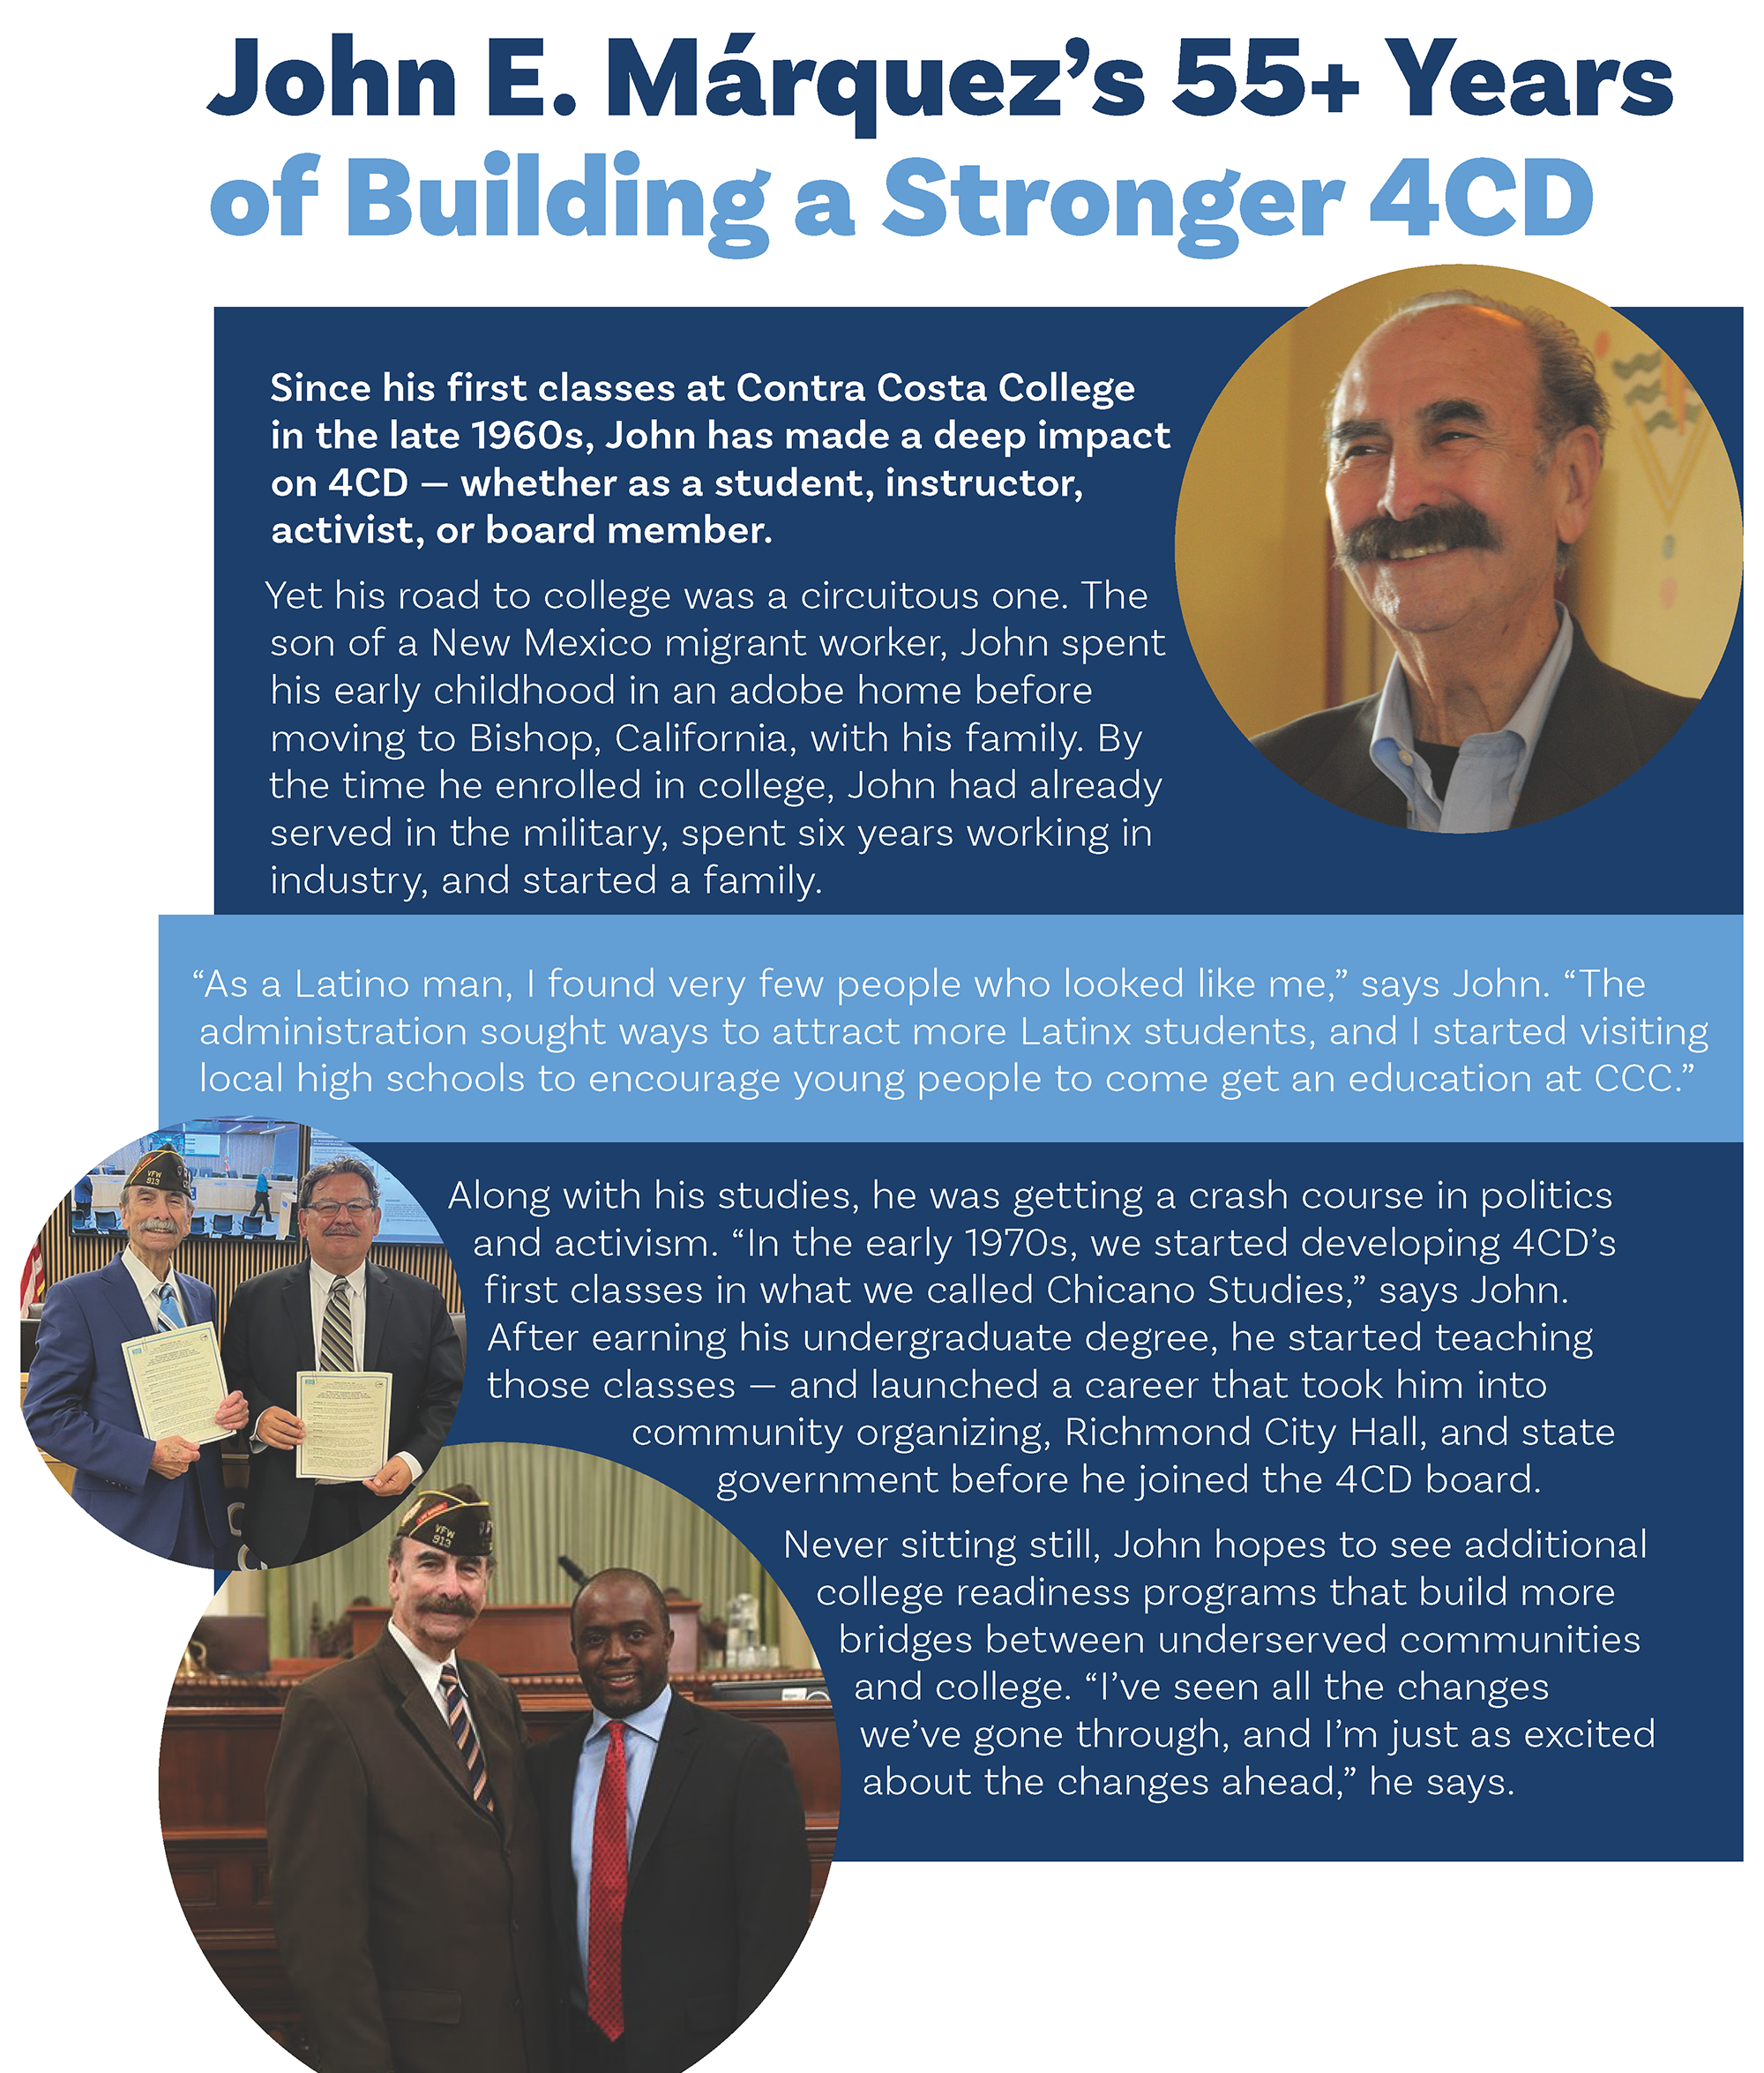 John Marquez’s 55+ Years of Building a Stronger 4CD